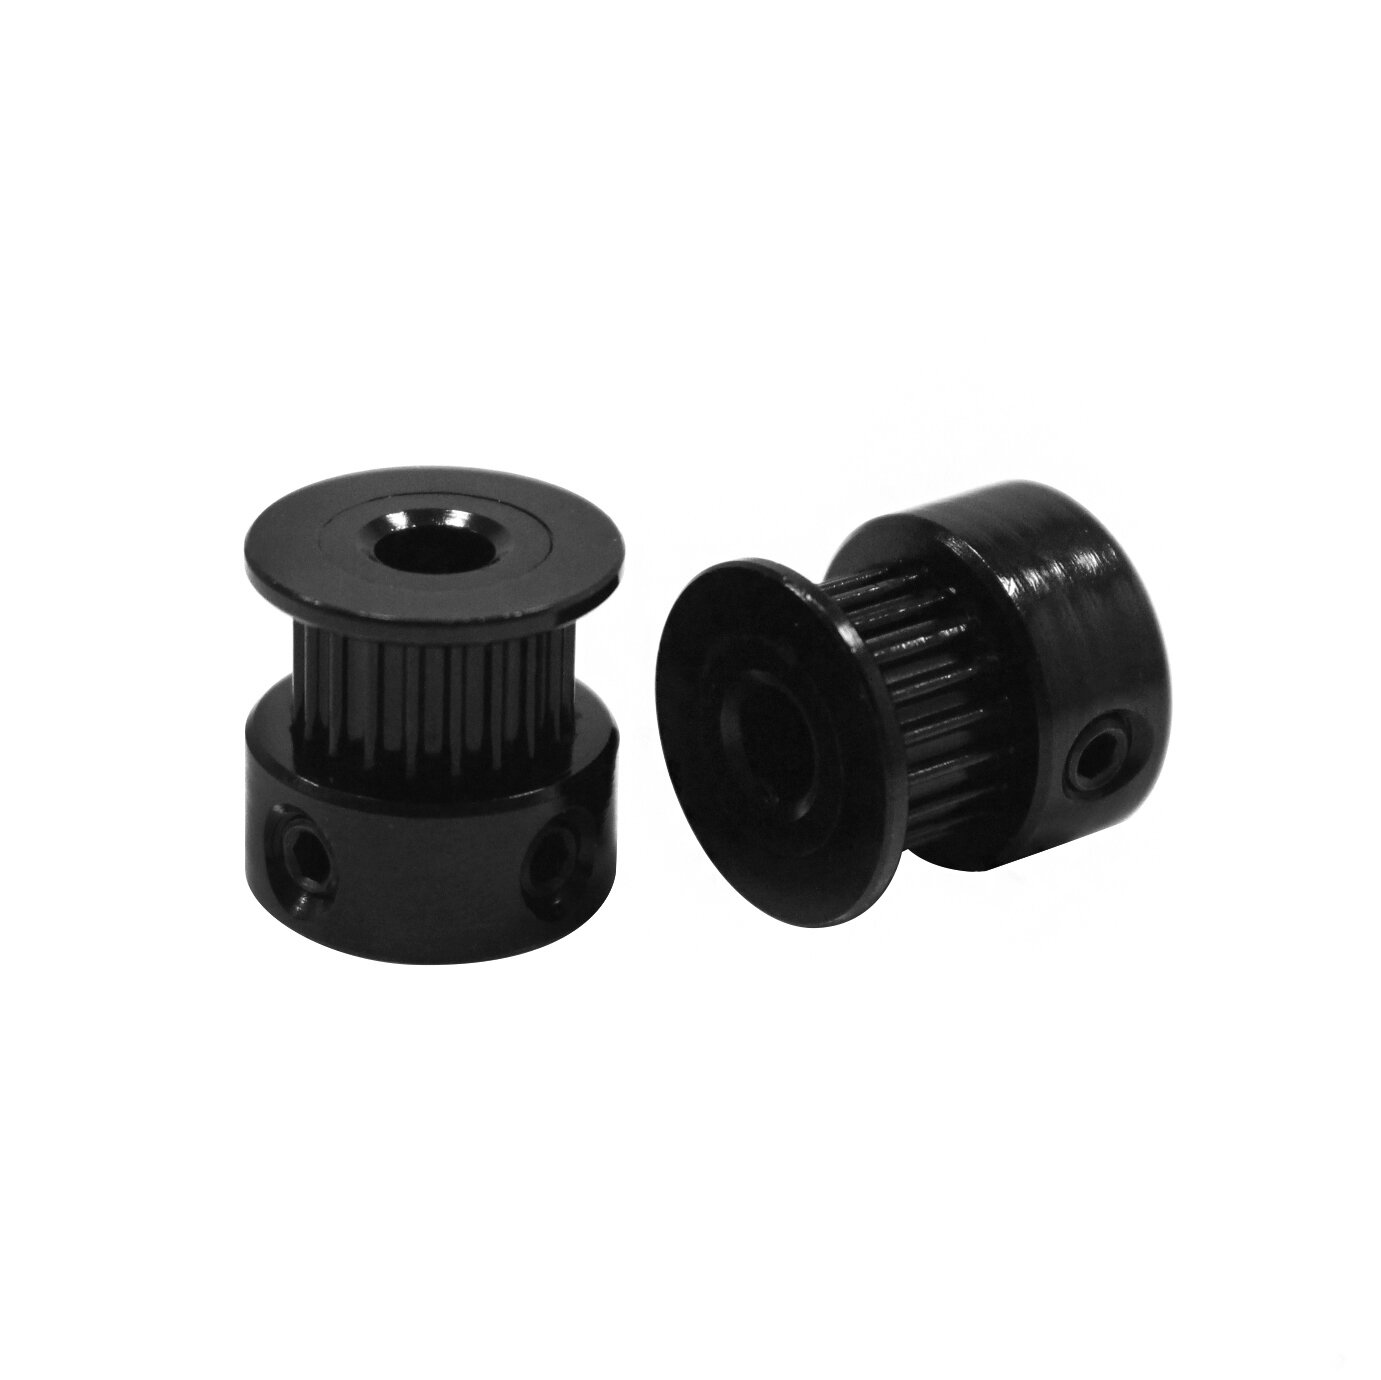 

TWO TREES® GT2 Timing Pulley Black Bore 5mm 6.35mm 8mm for Width 6mm GT2 synchronous belt 2GT Belt 20teeth pulley